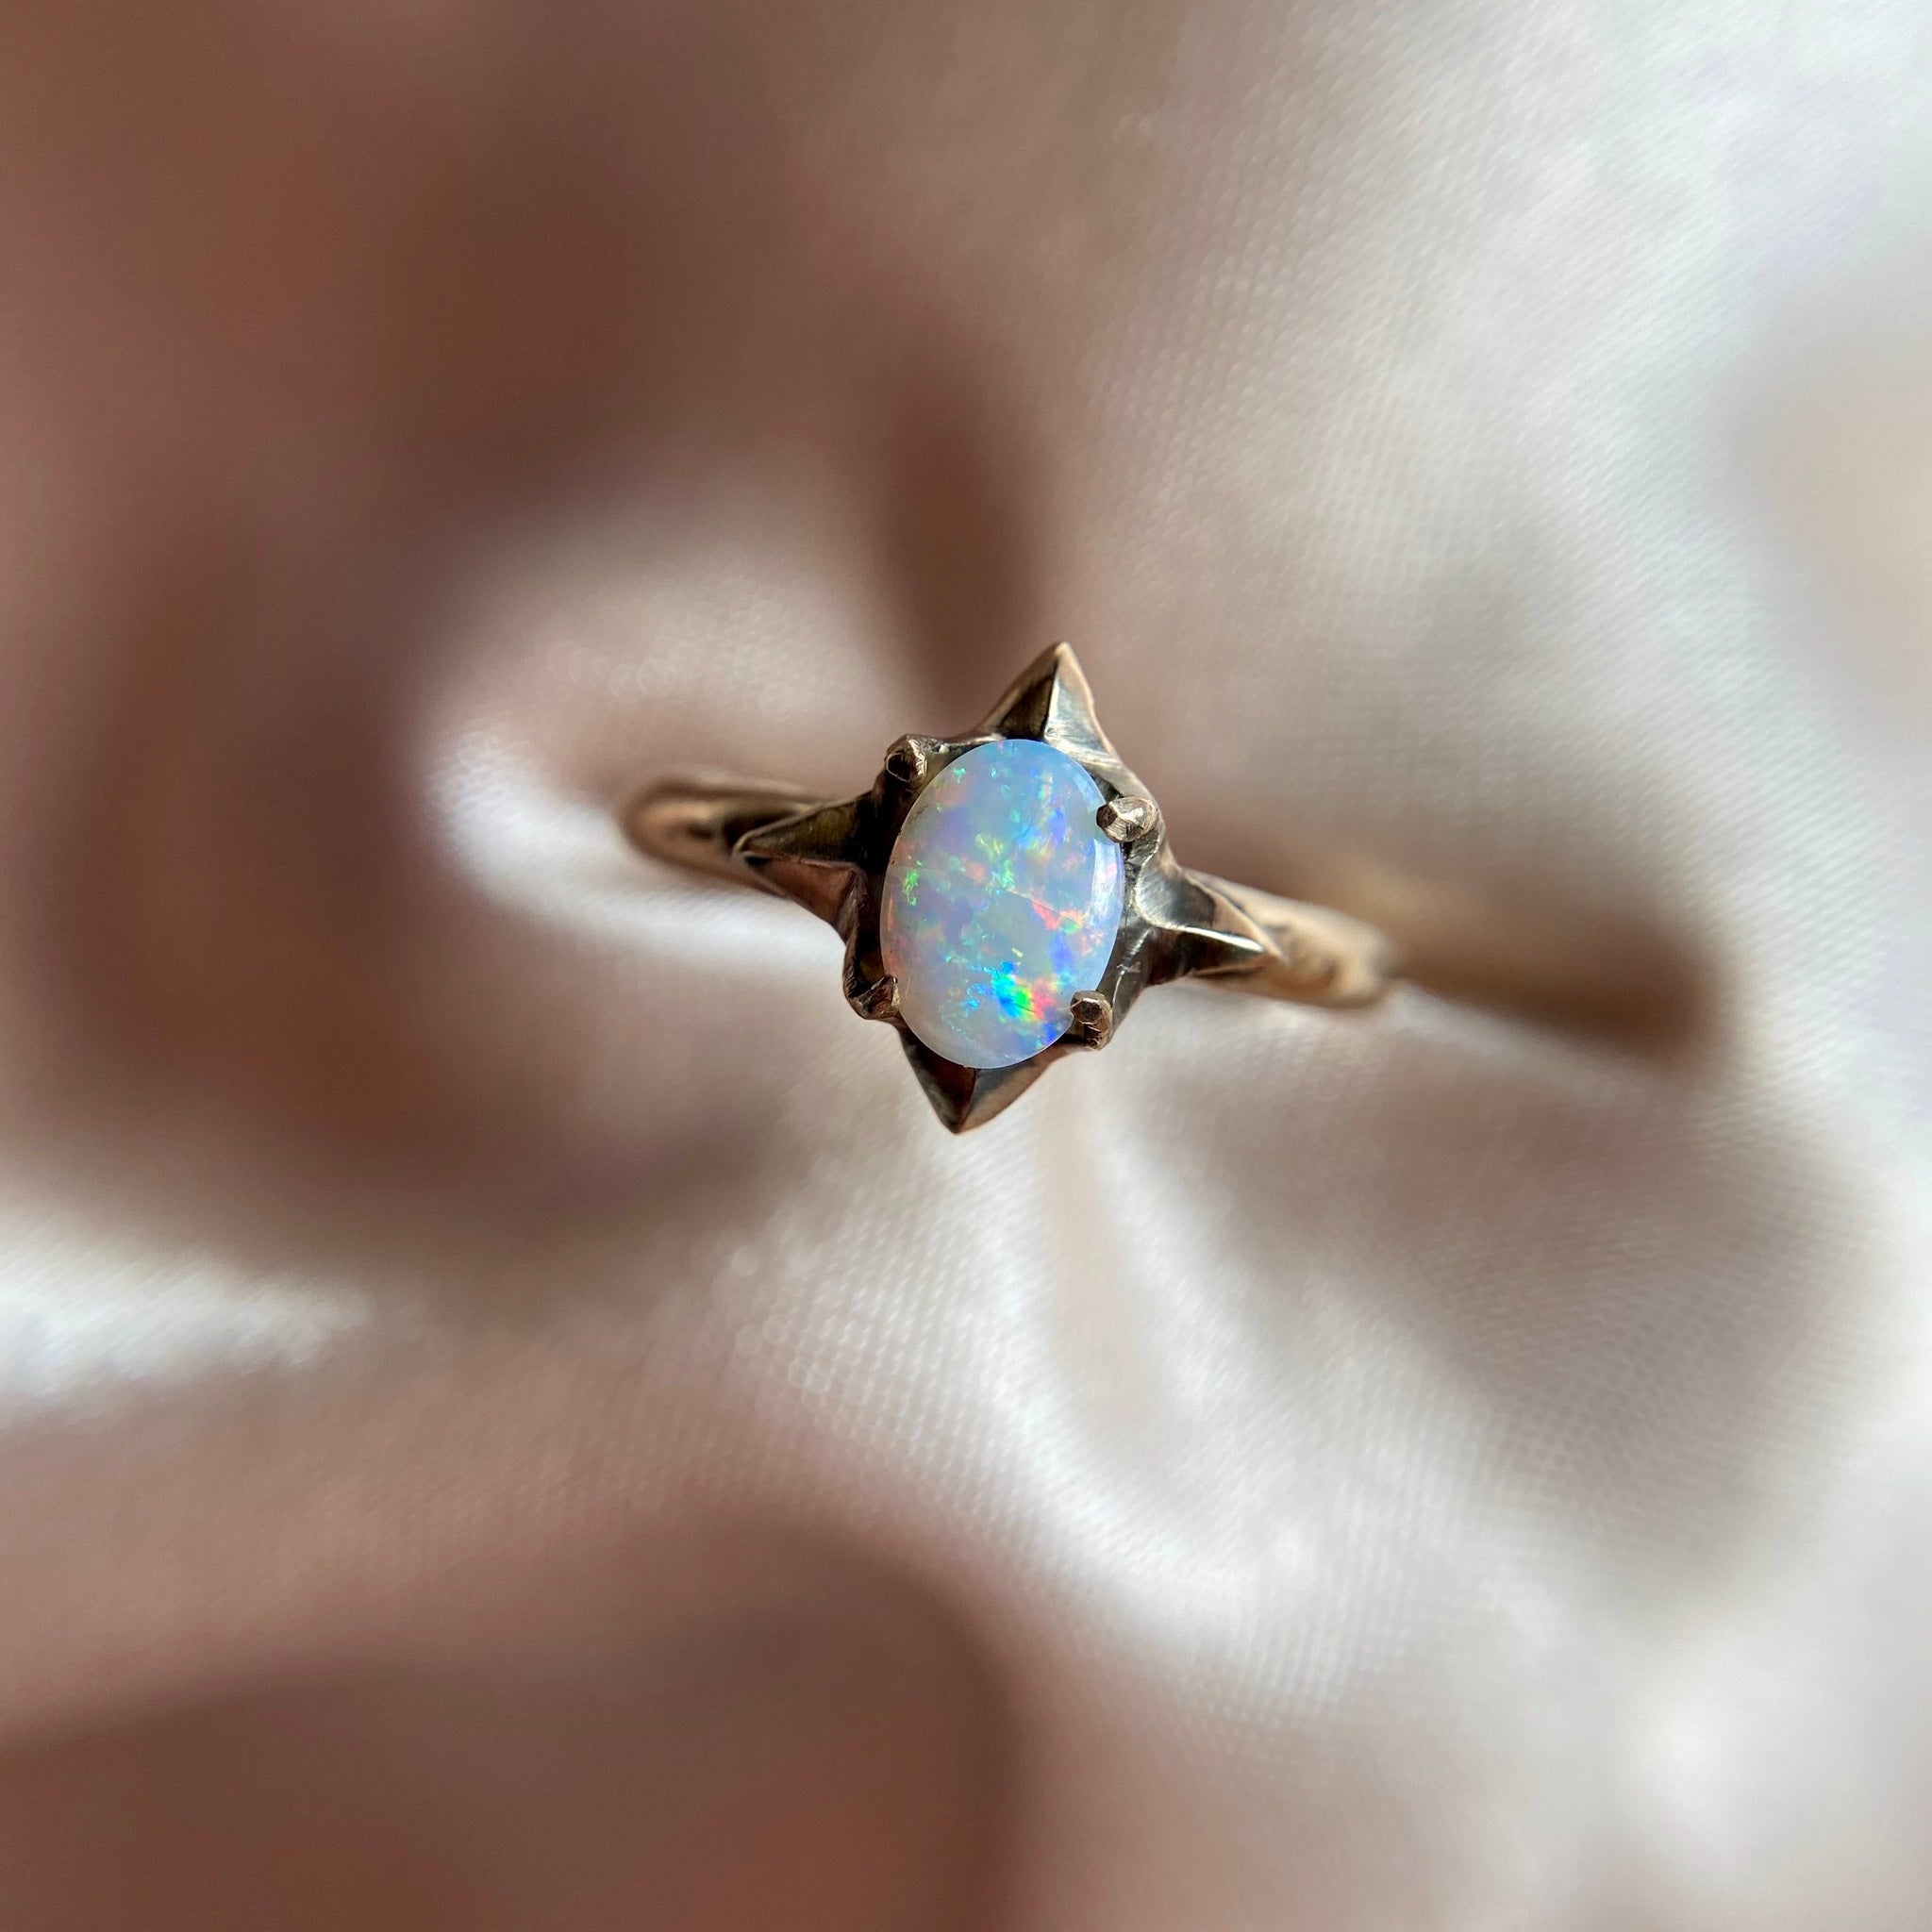 Buy Opal Engagement Ring, Blue Australian Opal Ring, Fire Opal & Diamond  Rose Gold Ring, Vintage Wedding Ring Online in India - Etsy